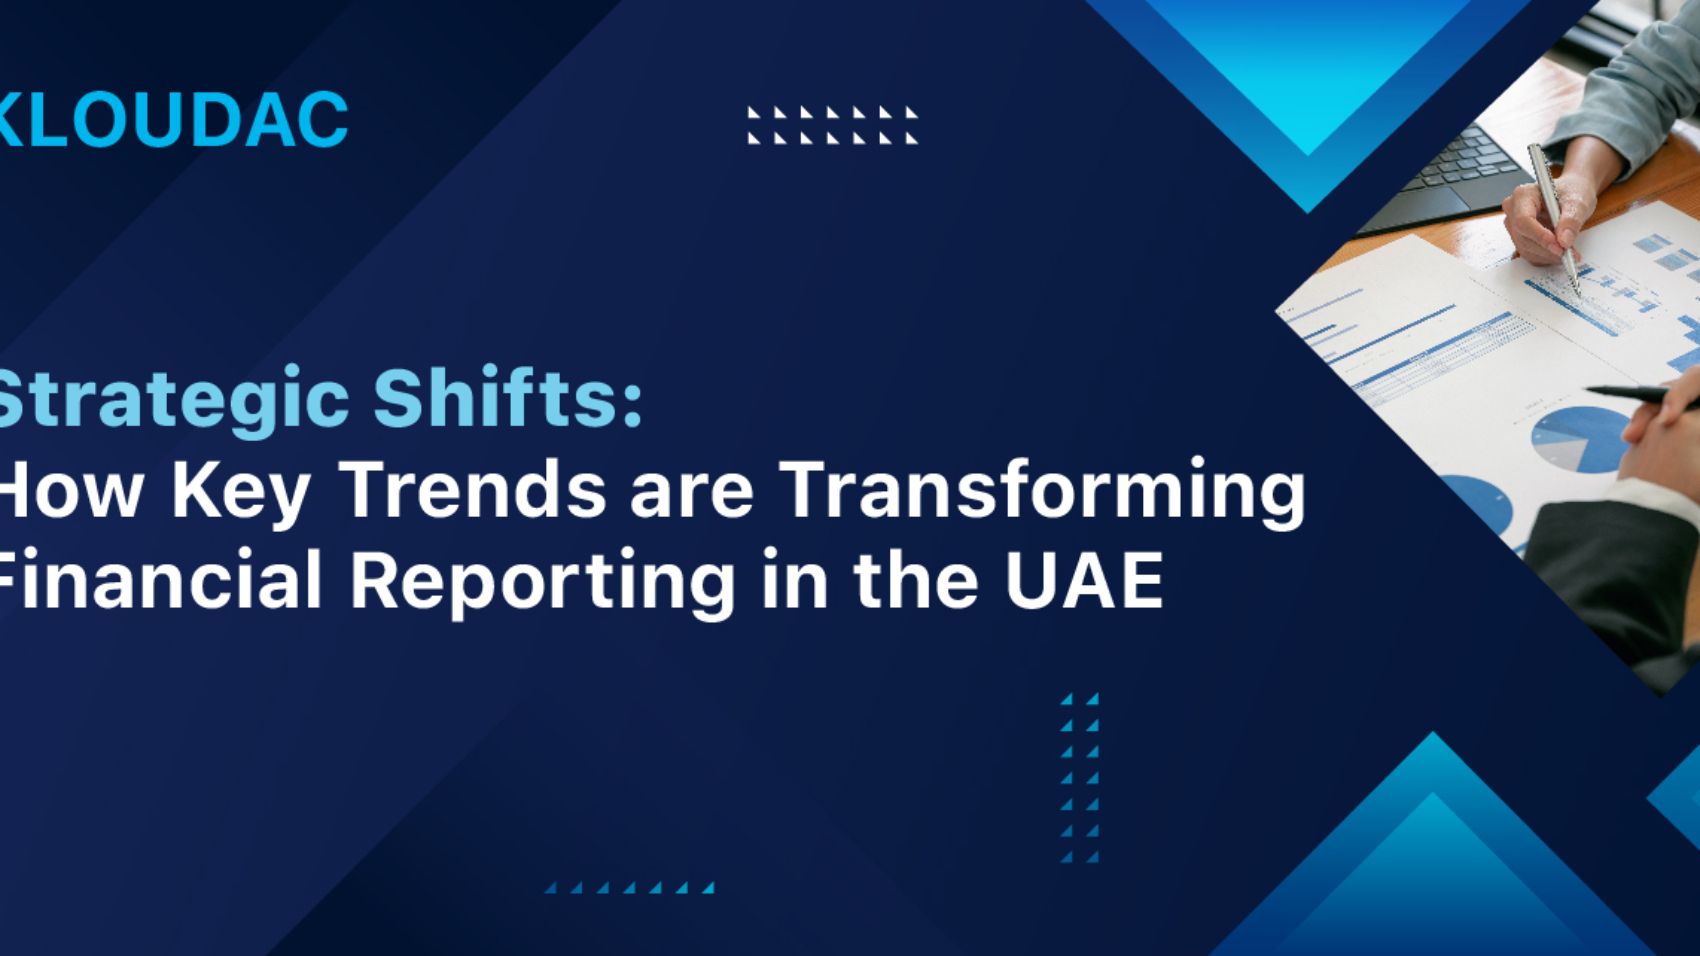 Strategic Shifts: How Key Trends are Transforming Financial Reporting in the UAE